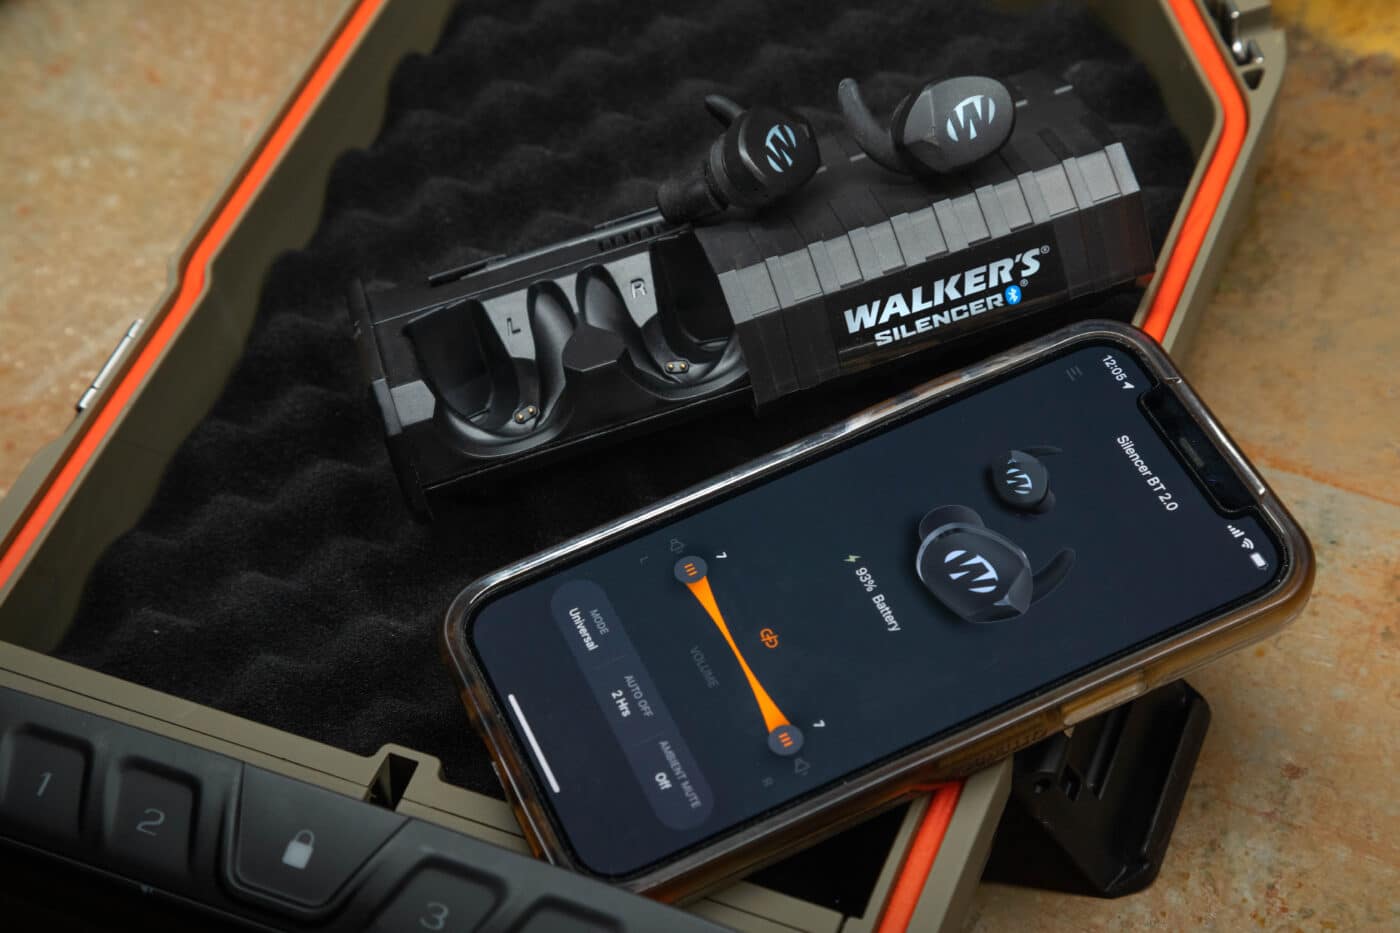 Remotely controlling the Bluetooth earbuds with the Walkers app